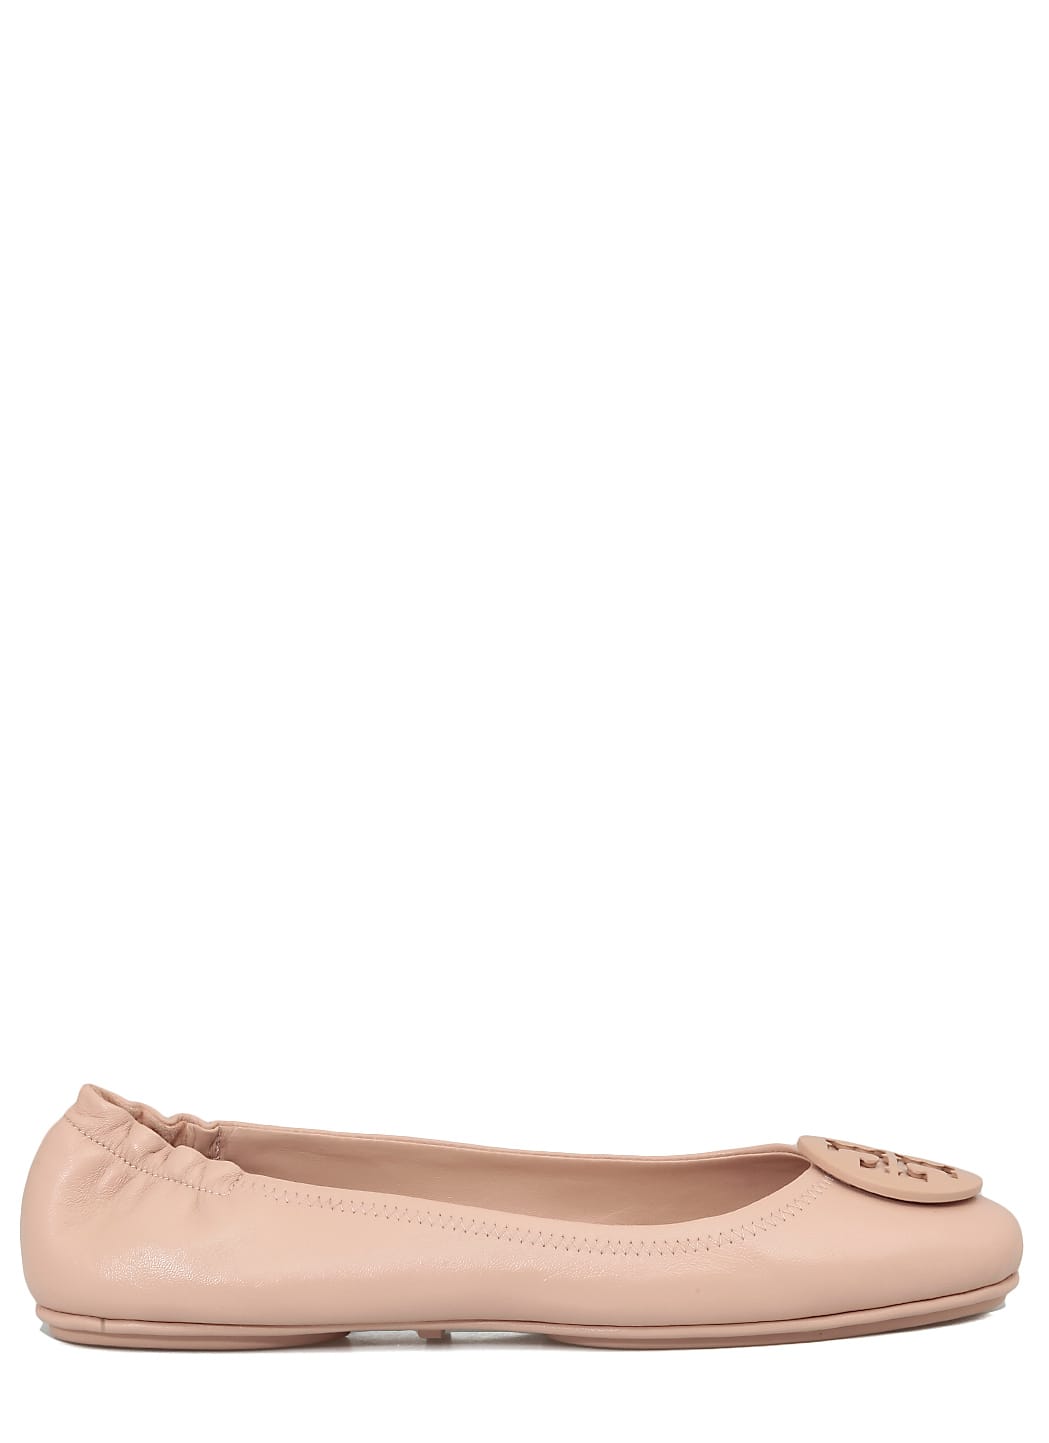 Buy Tory Burch Minnie Travel Ballet online, shop Tory Burch shoes with free shipping